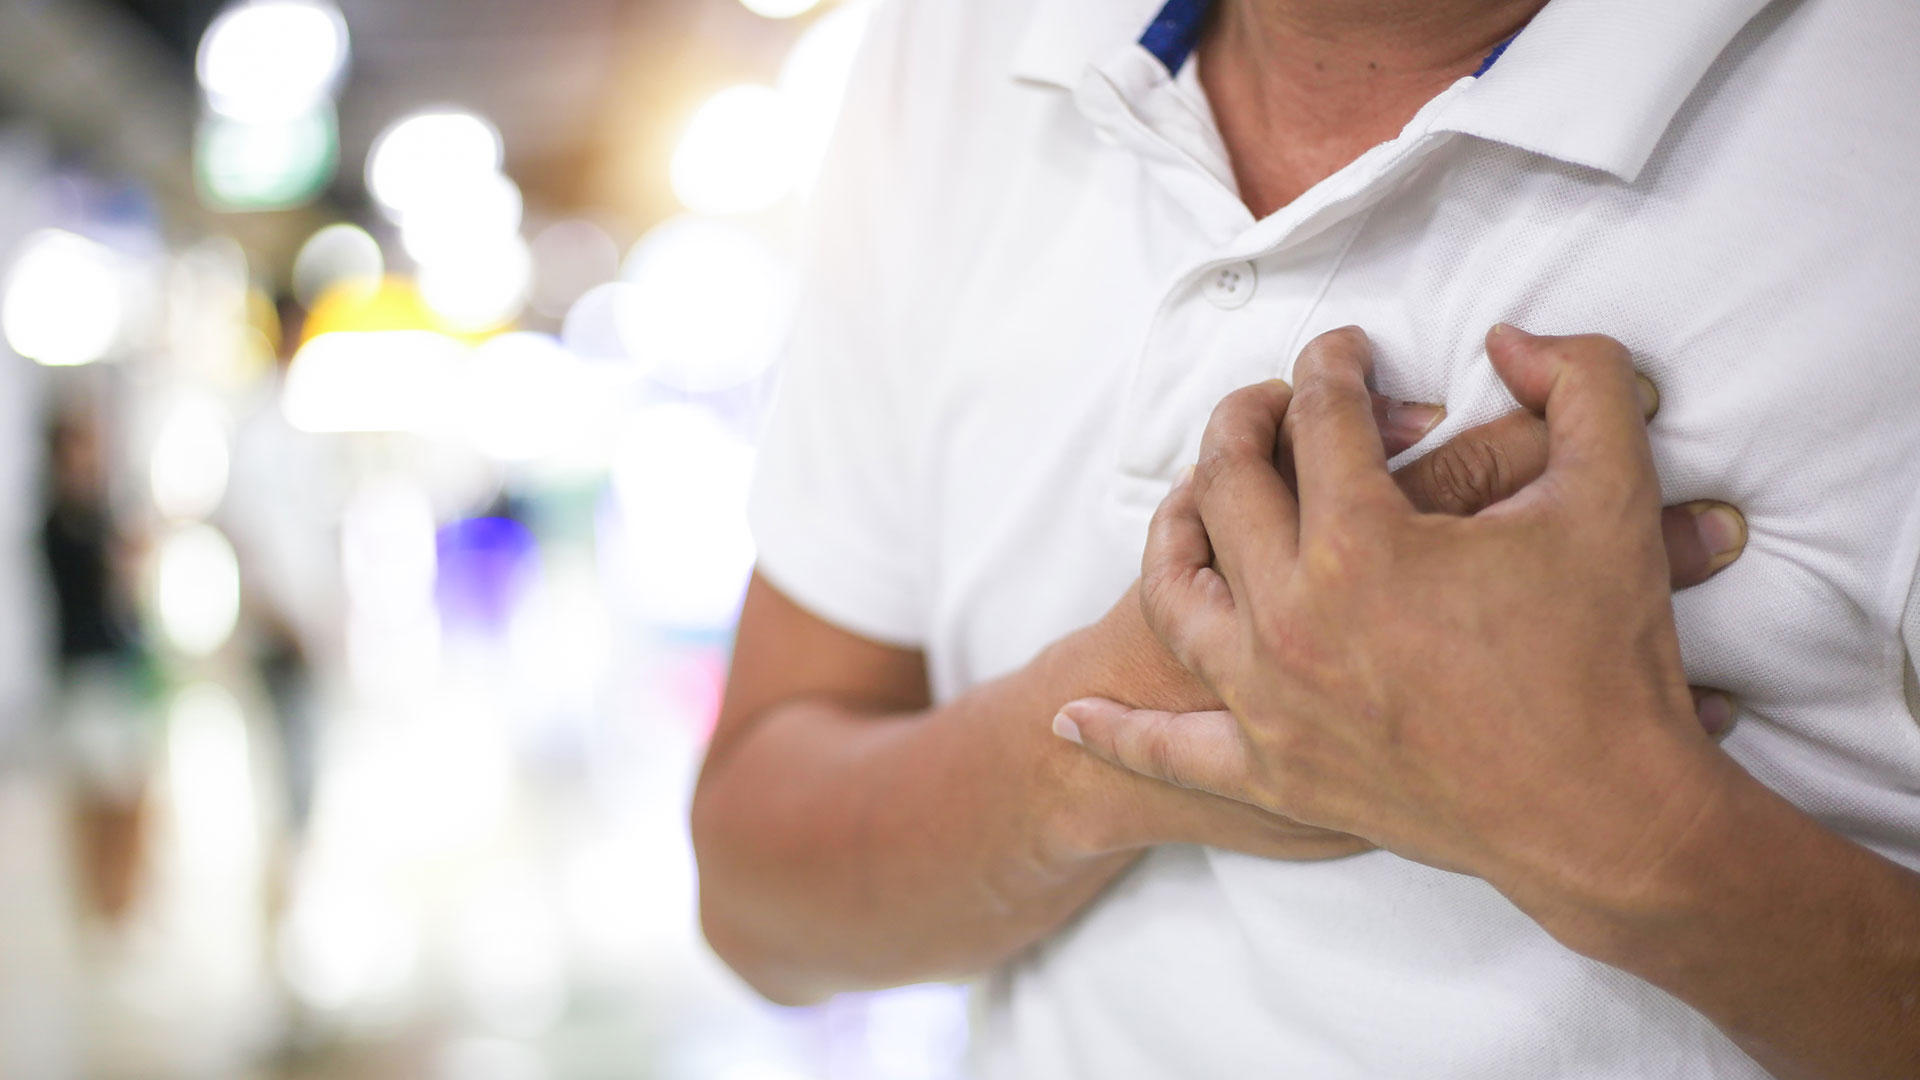 High Glucose Levels Predict Re-Hospitalization for Chest Pain